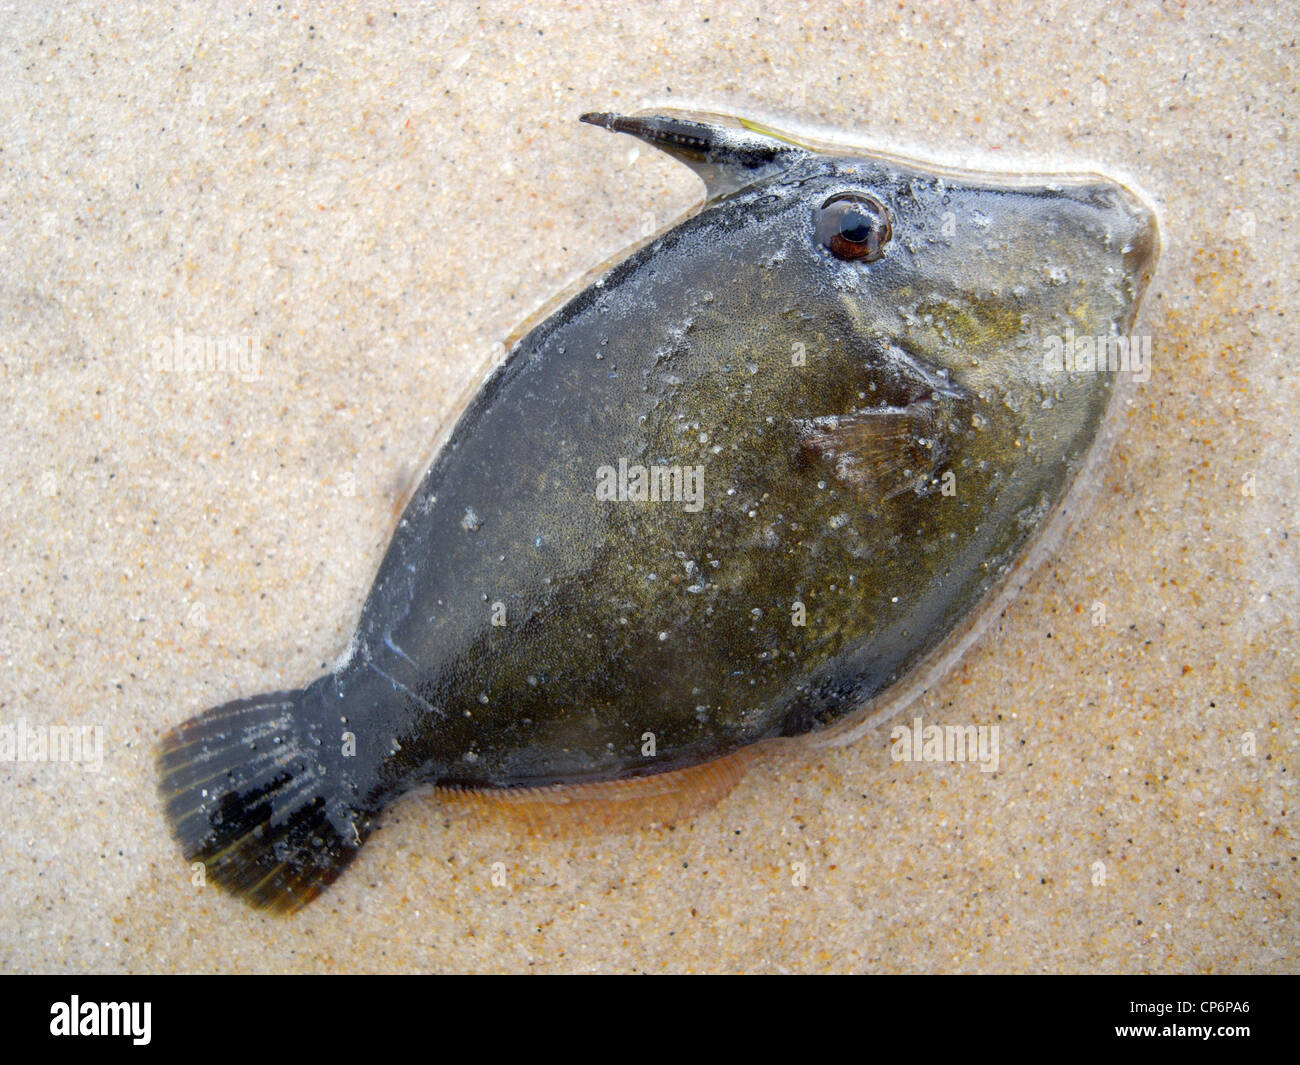 Dead triggerfish (family Balistidae) washed up on beach after a storm, Sunshine Beach, Sunshine Coast, Queensland, Australia Stock Photo